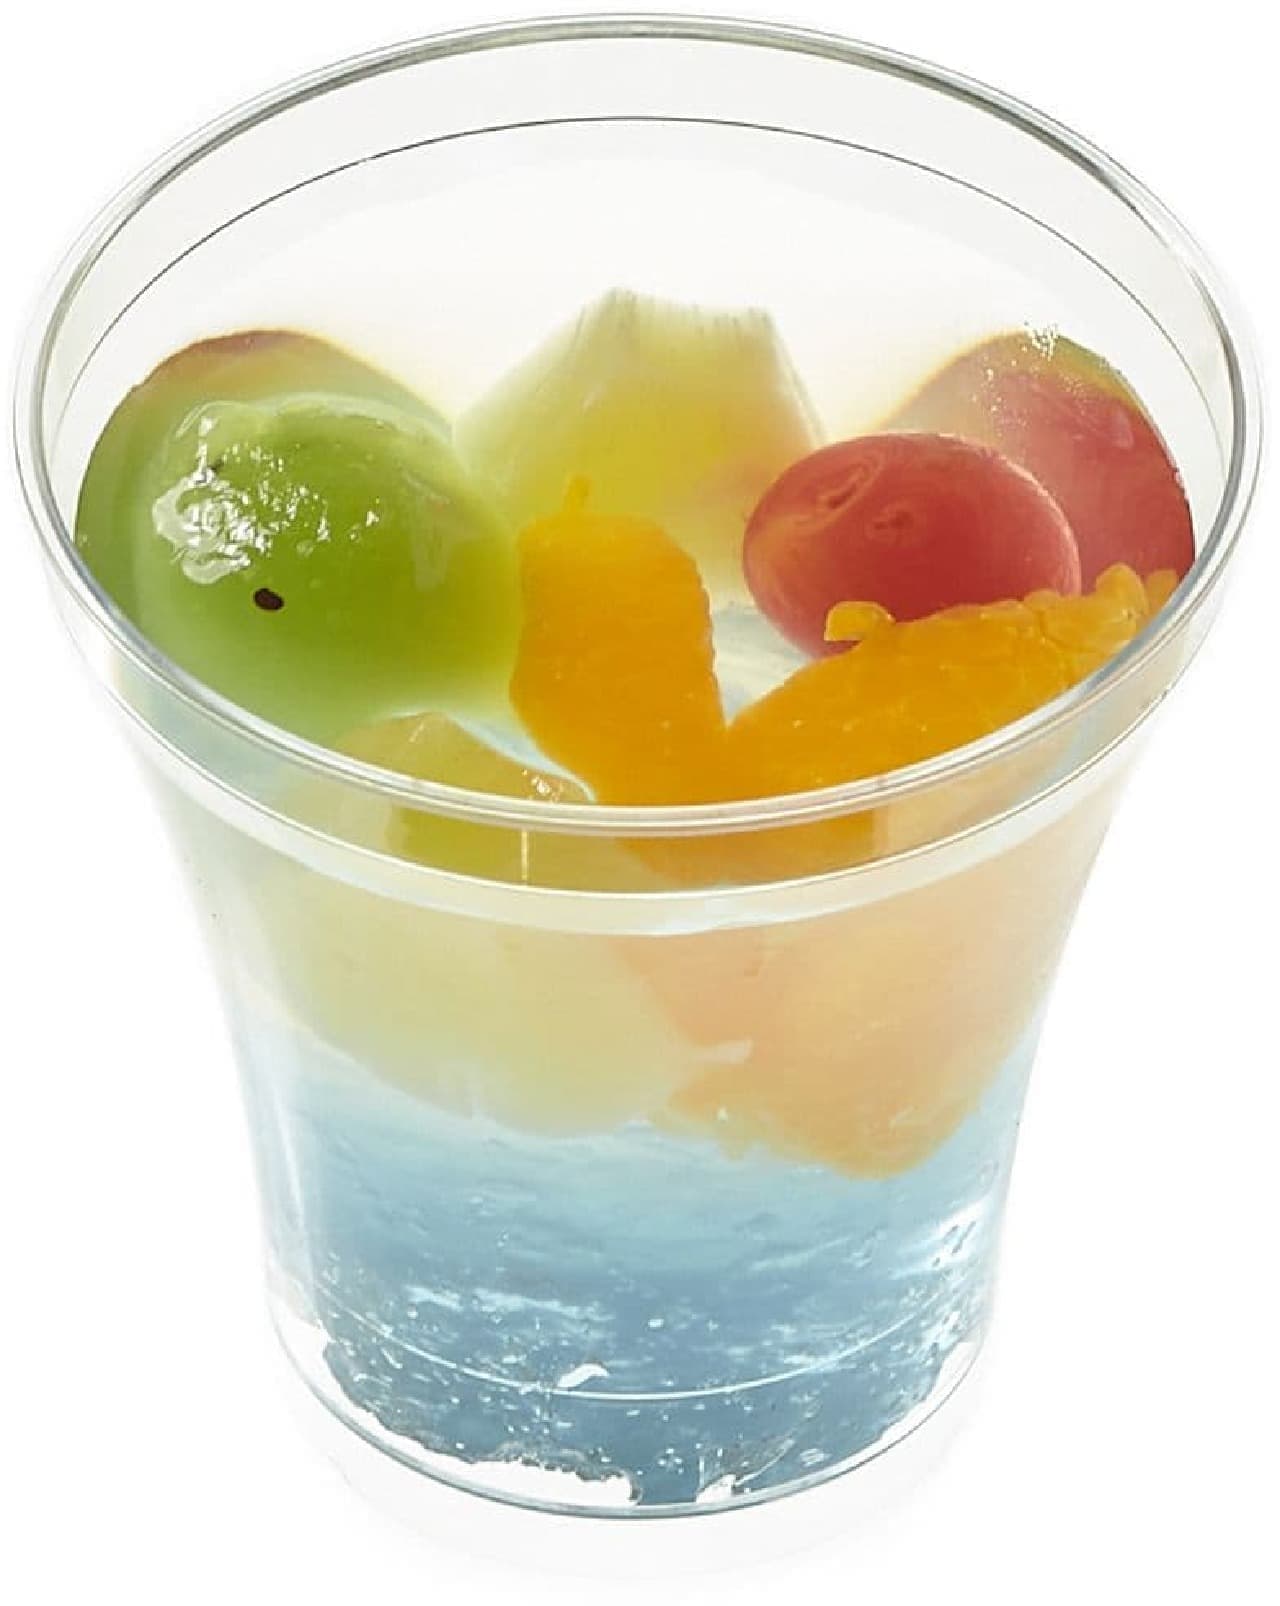 7-ELEVEN "Summer Punch Jelly with Kiwi Warabi